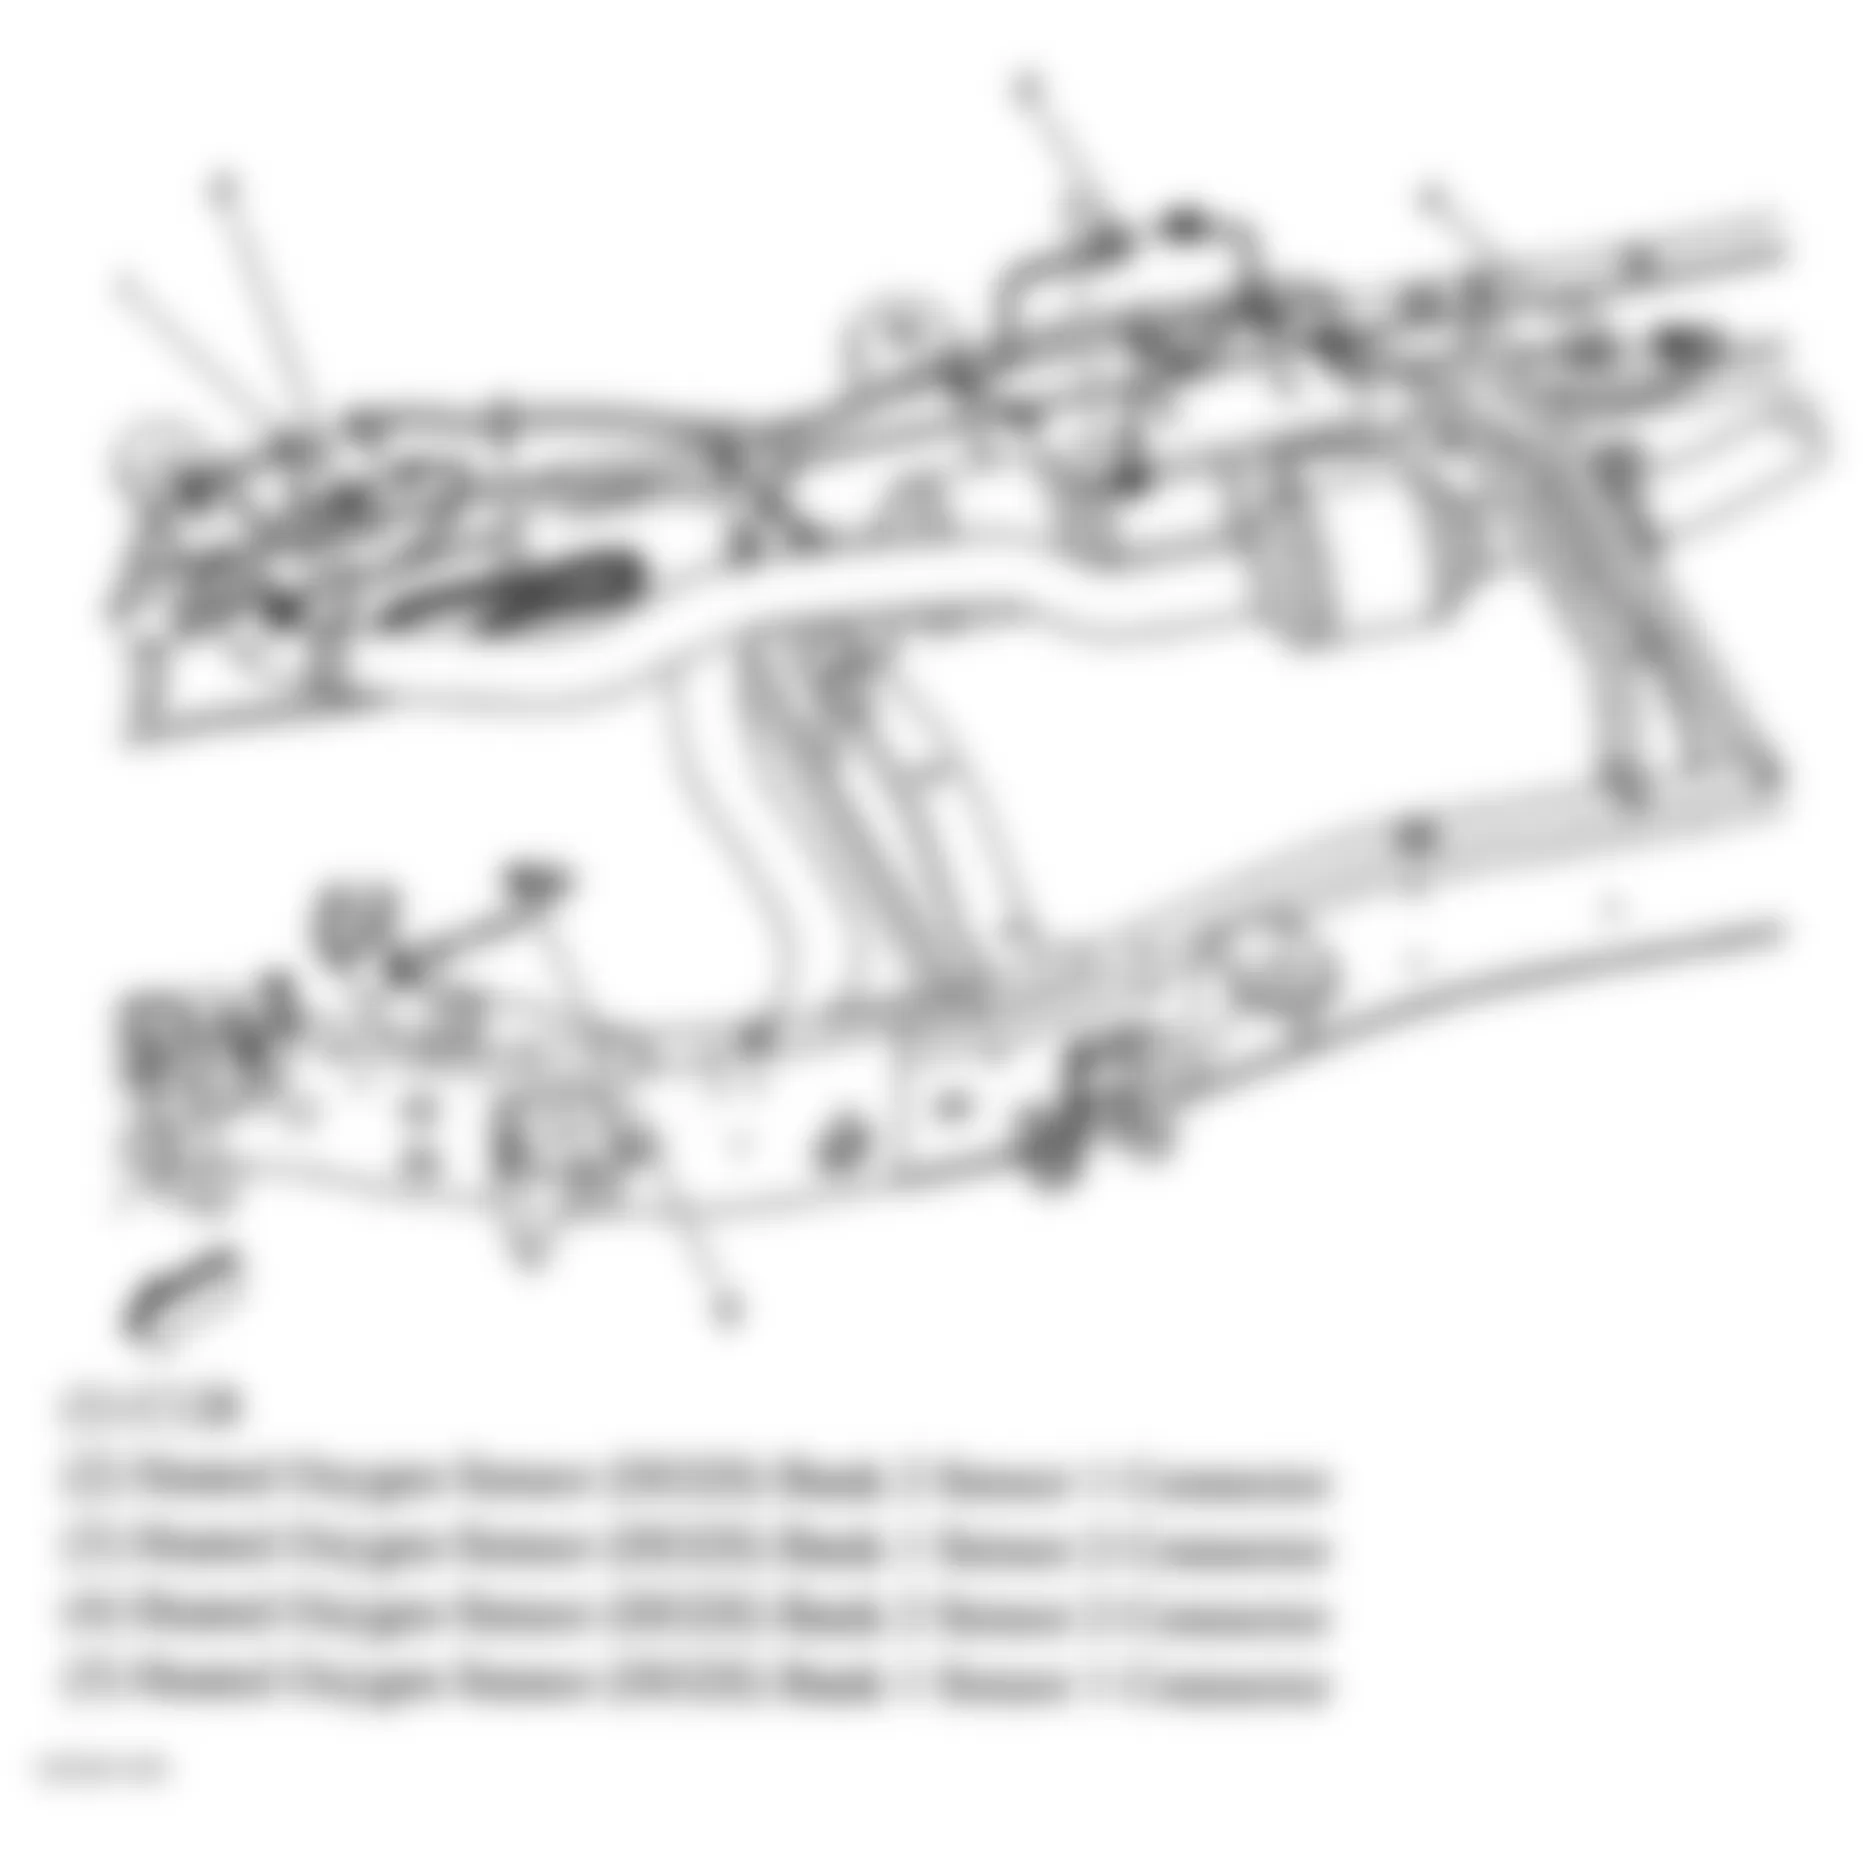 GMC Savana H1500 2005 - Component Locations -  Center Of Chassis